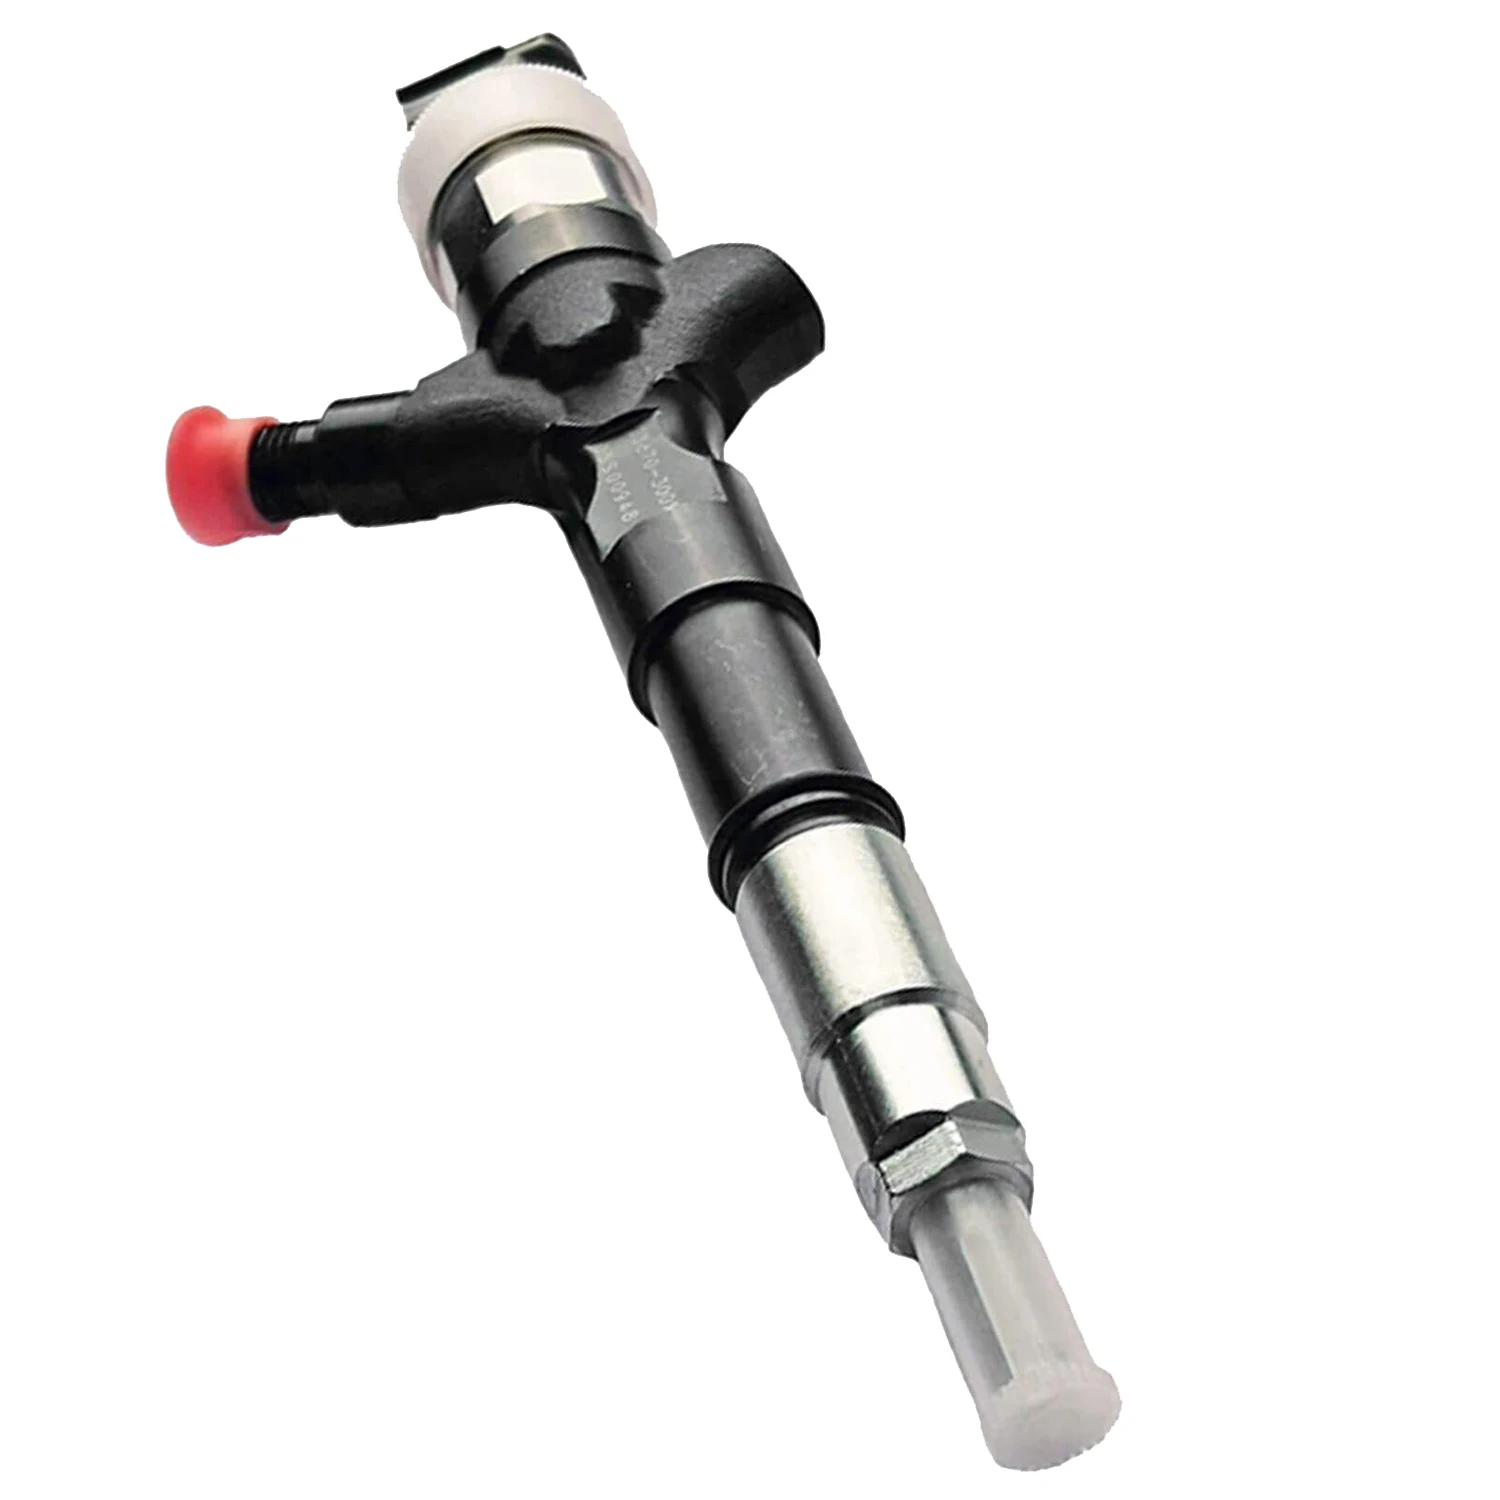 

New Diesel Common Rail Injector 23670-30050 095000-5880 23670-39095 for Toyota 2KD-FTV HIACE TURBO